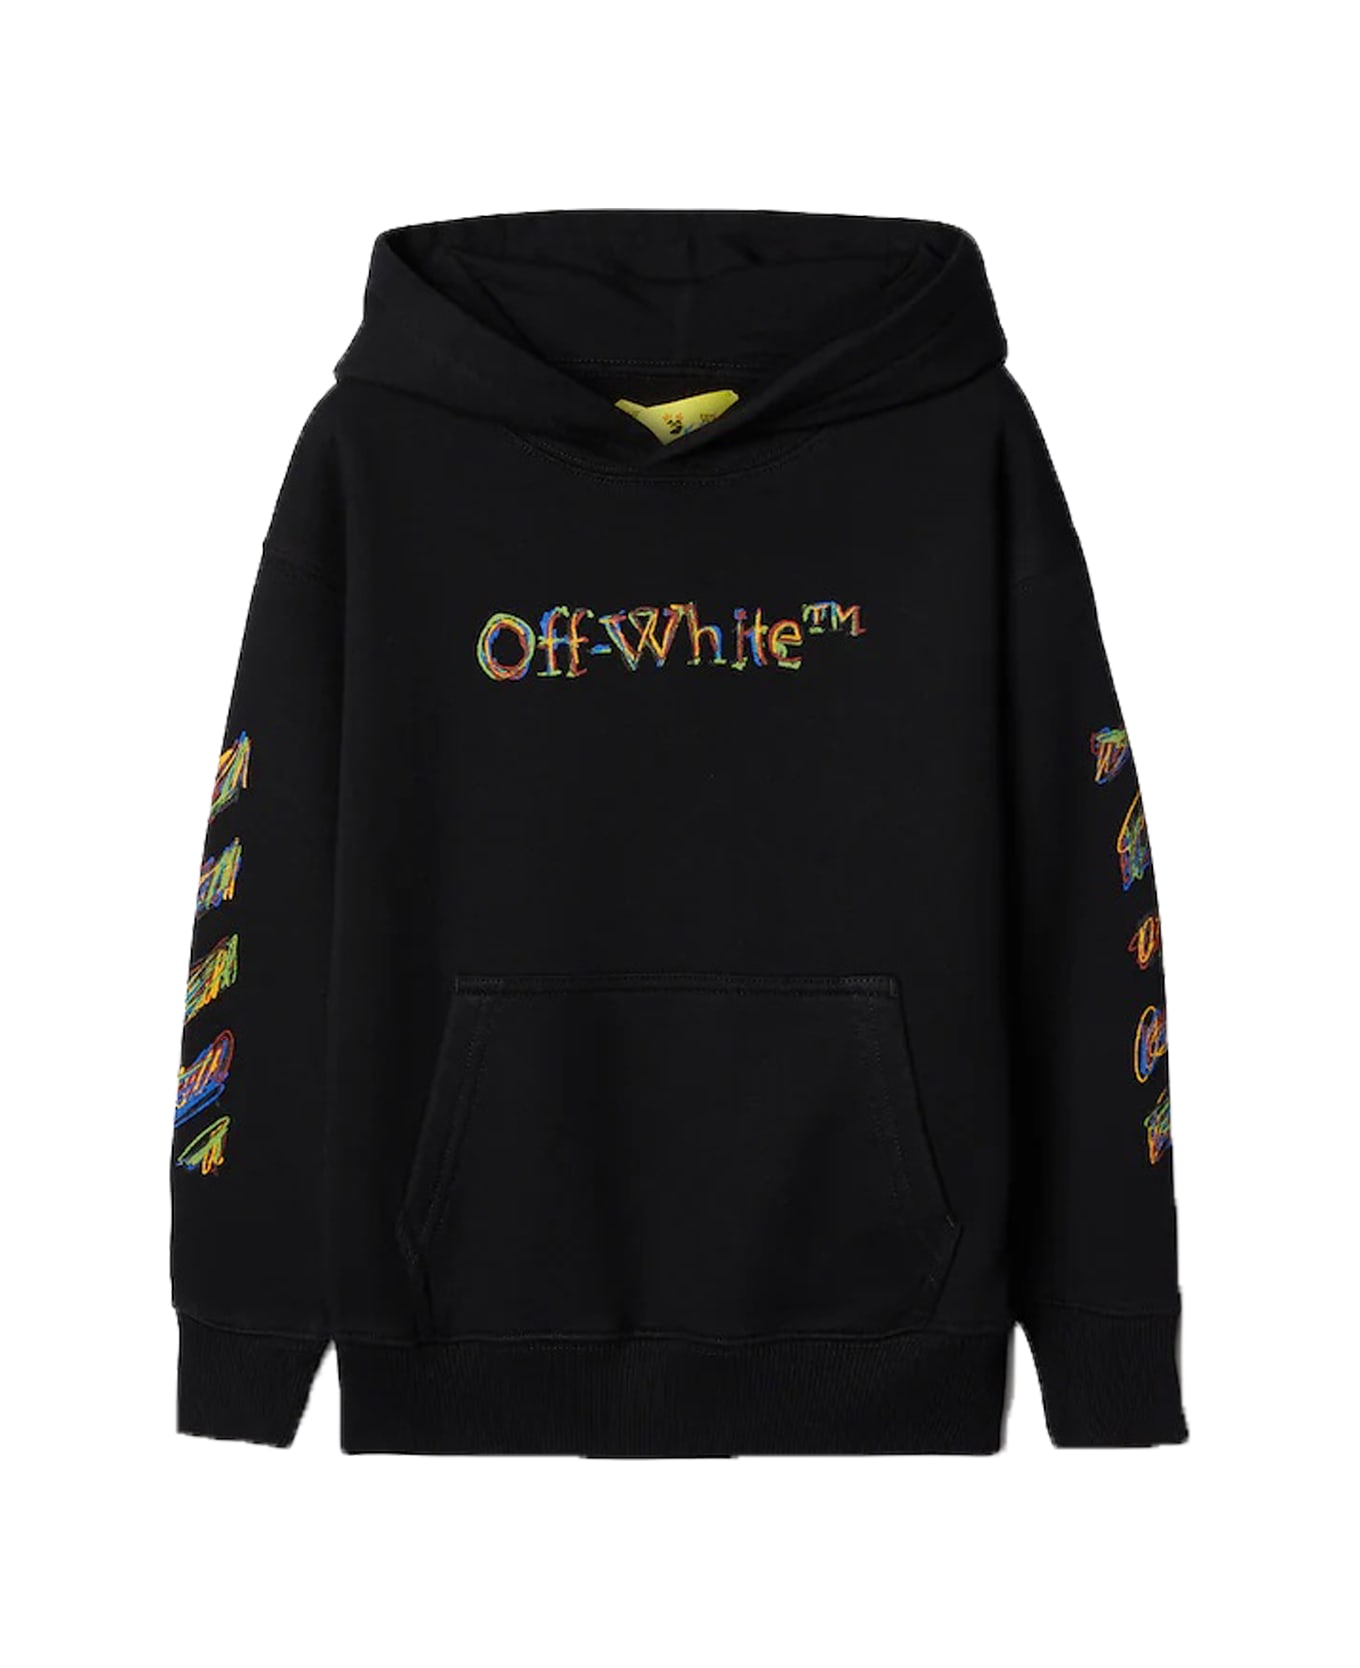 Off-White Sweatshirt With Hood And Sketch Logo - Back